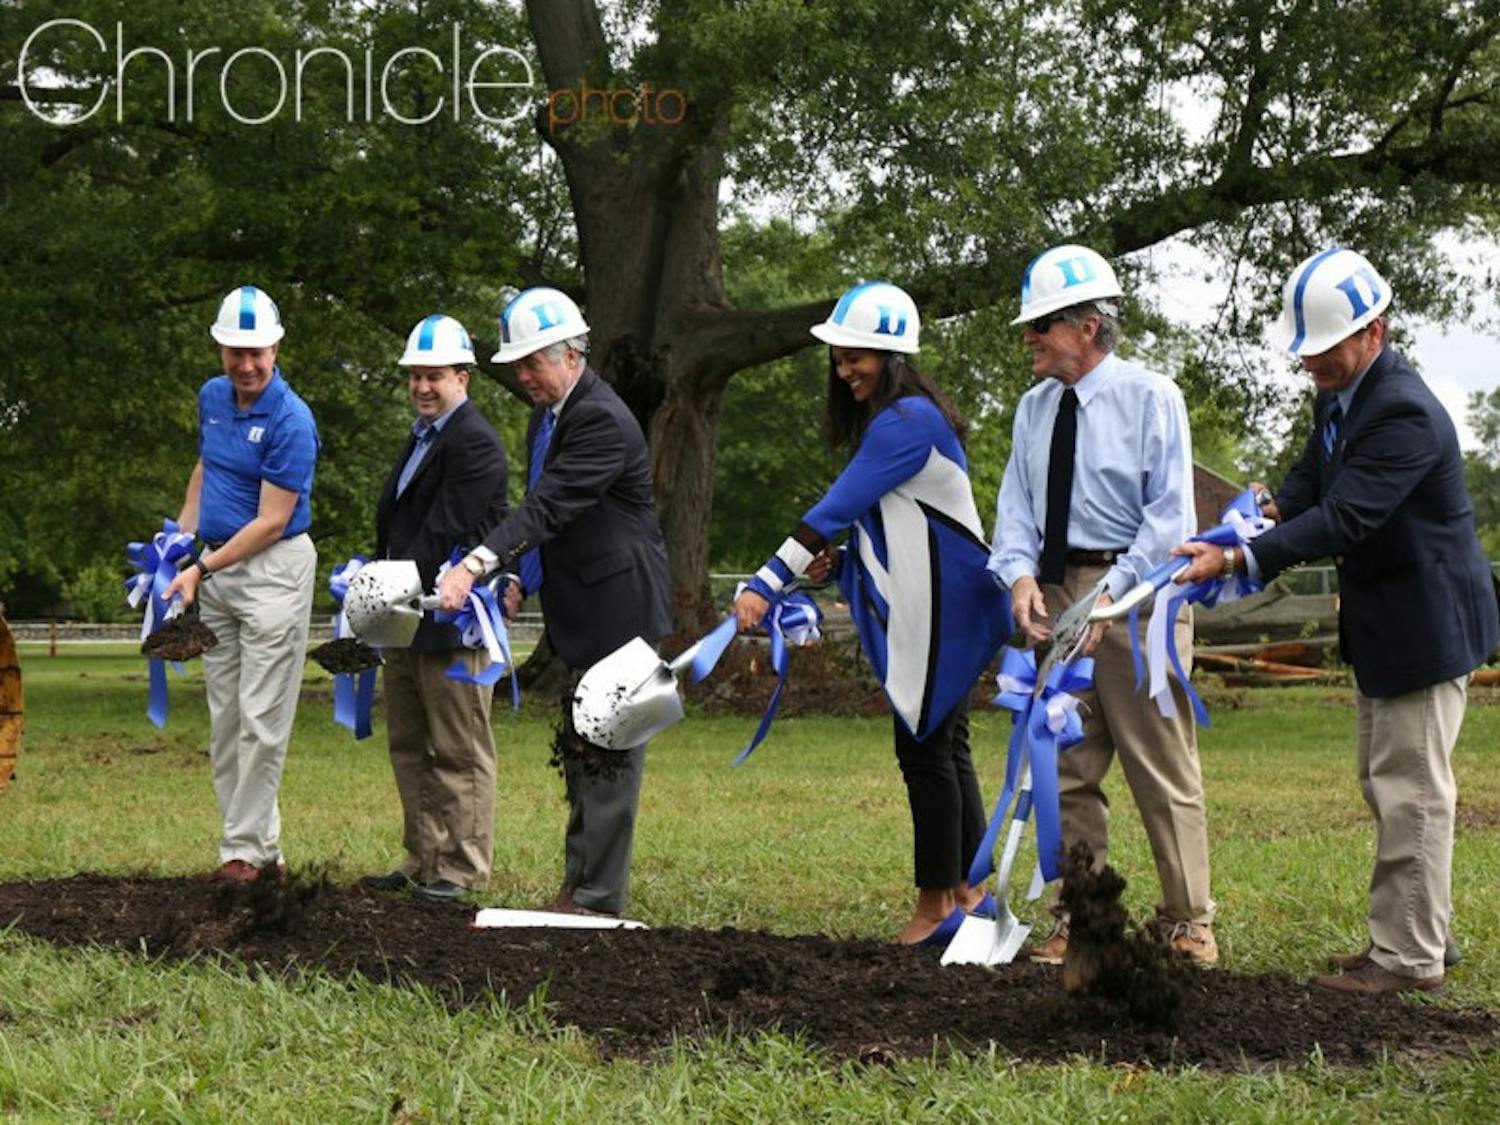 Marissa Young (third from right), Kevin White (third from left) and members of the Duke Athletics staff break ground on Duke Softball Stadium in May 2016.